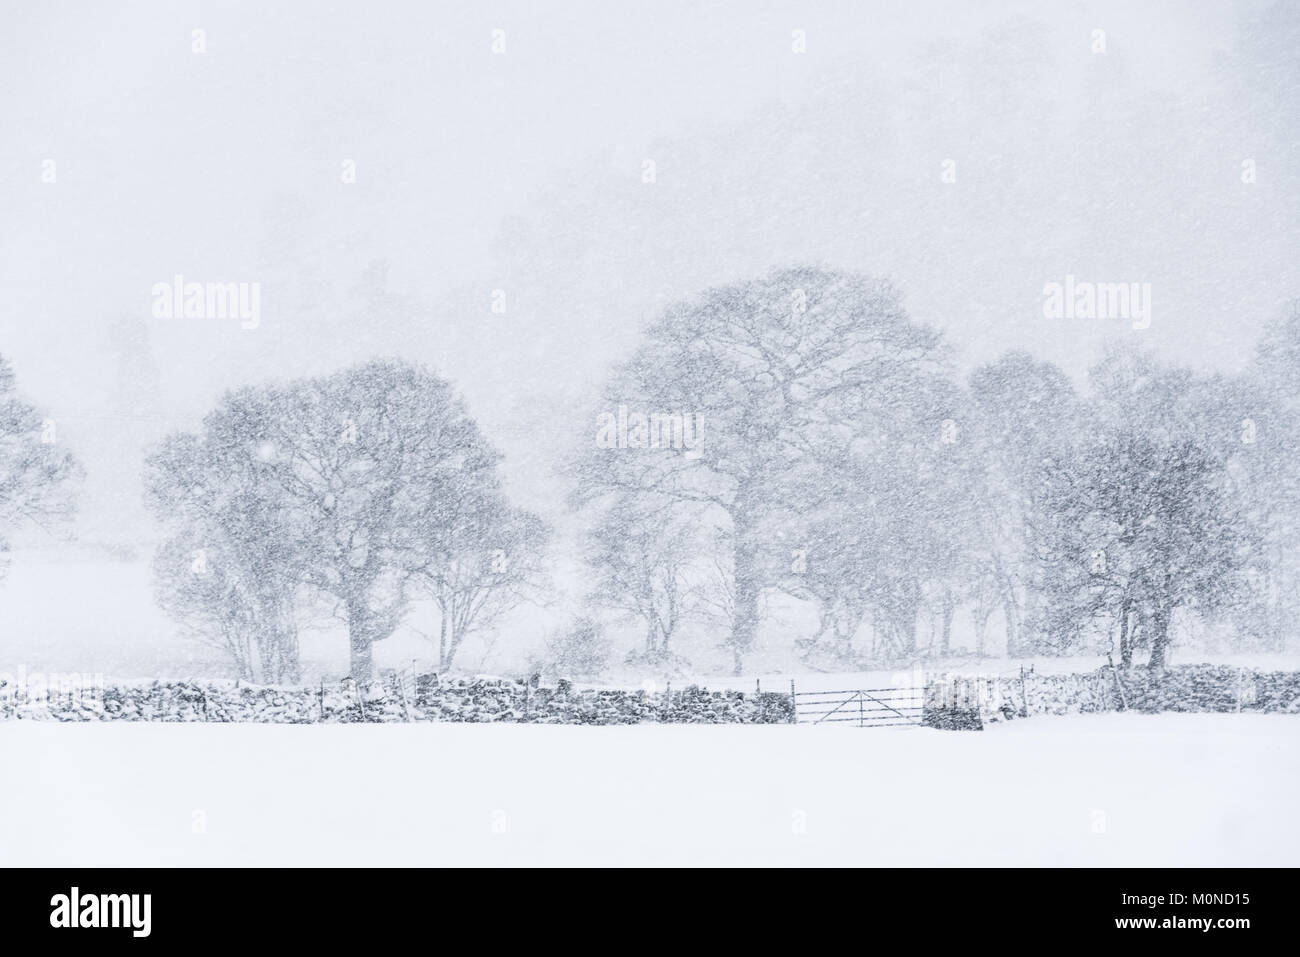 A lone tree adds contrast to a white out landscape during a snow storm Stock Photo